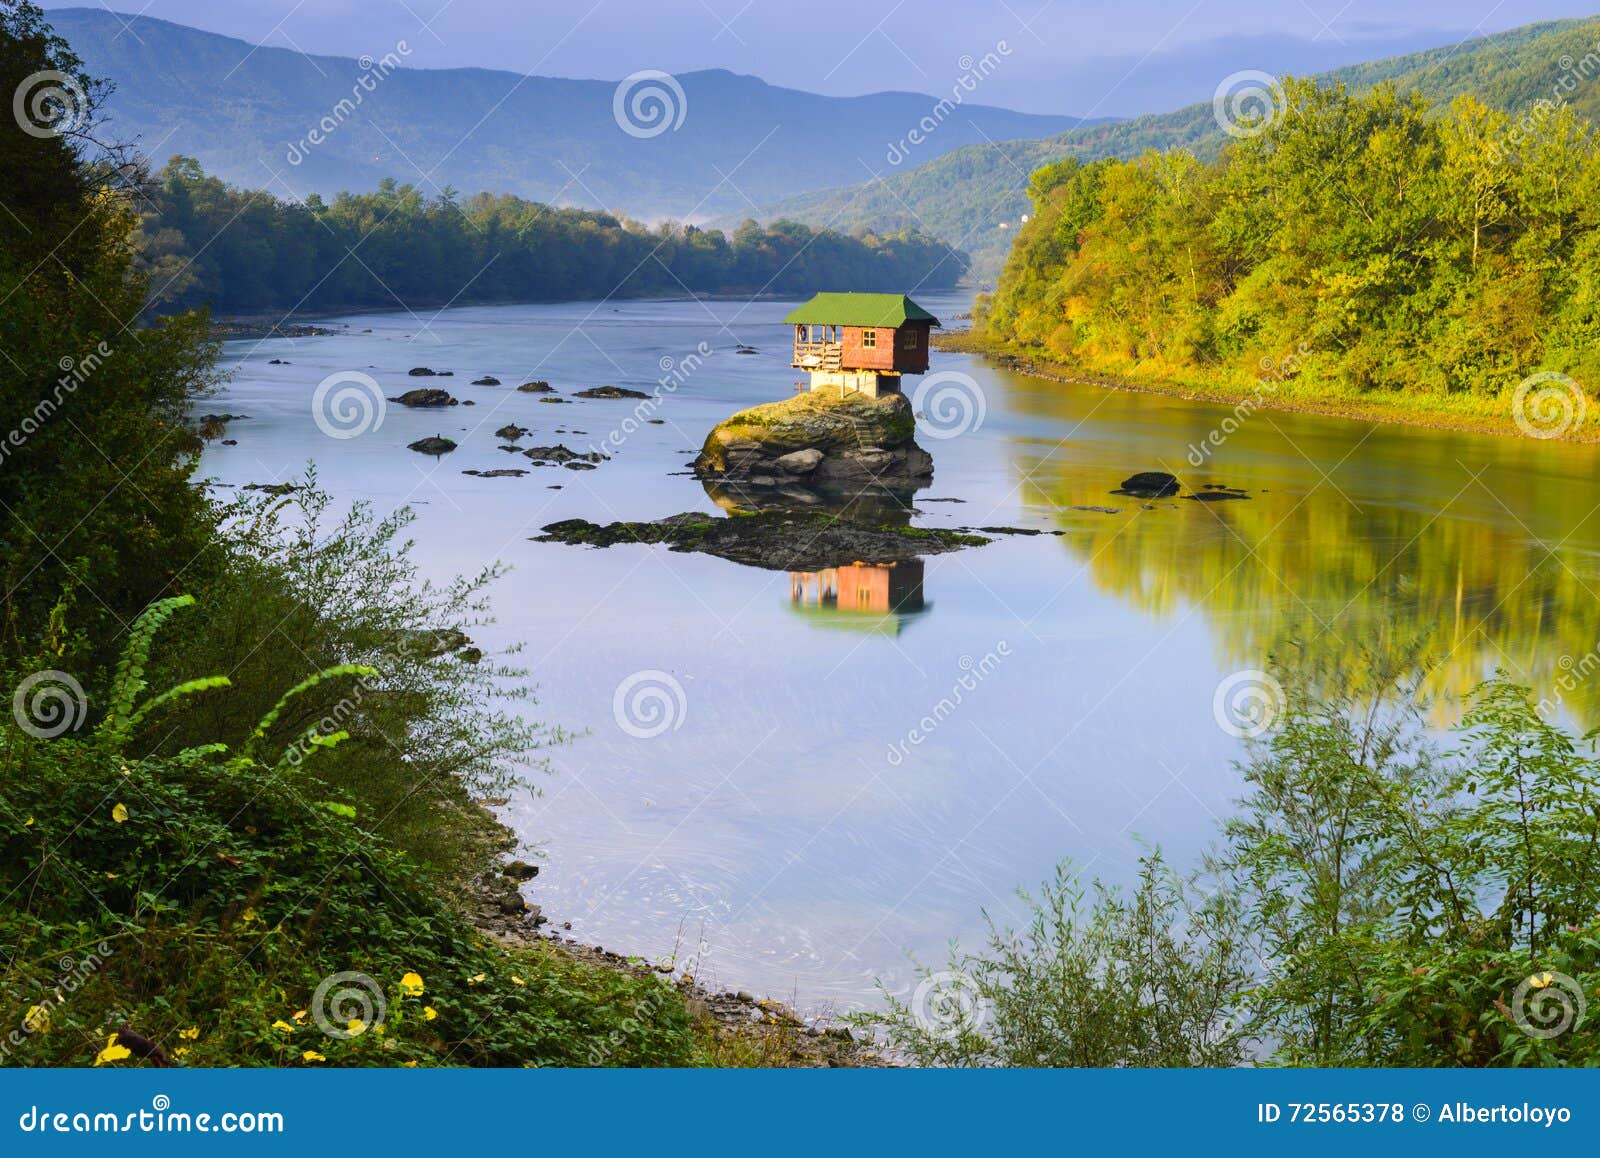 lonely house on the river drina in bajina basta, serbia